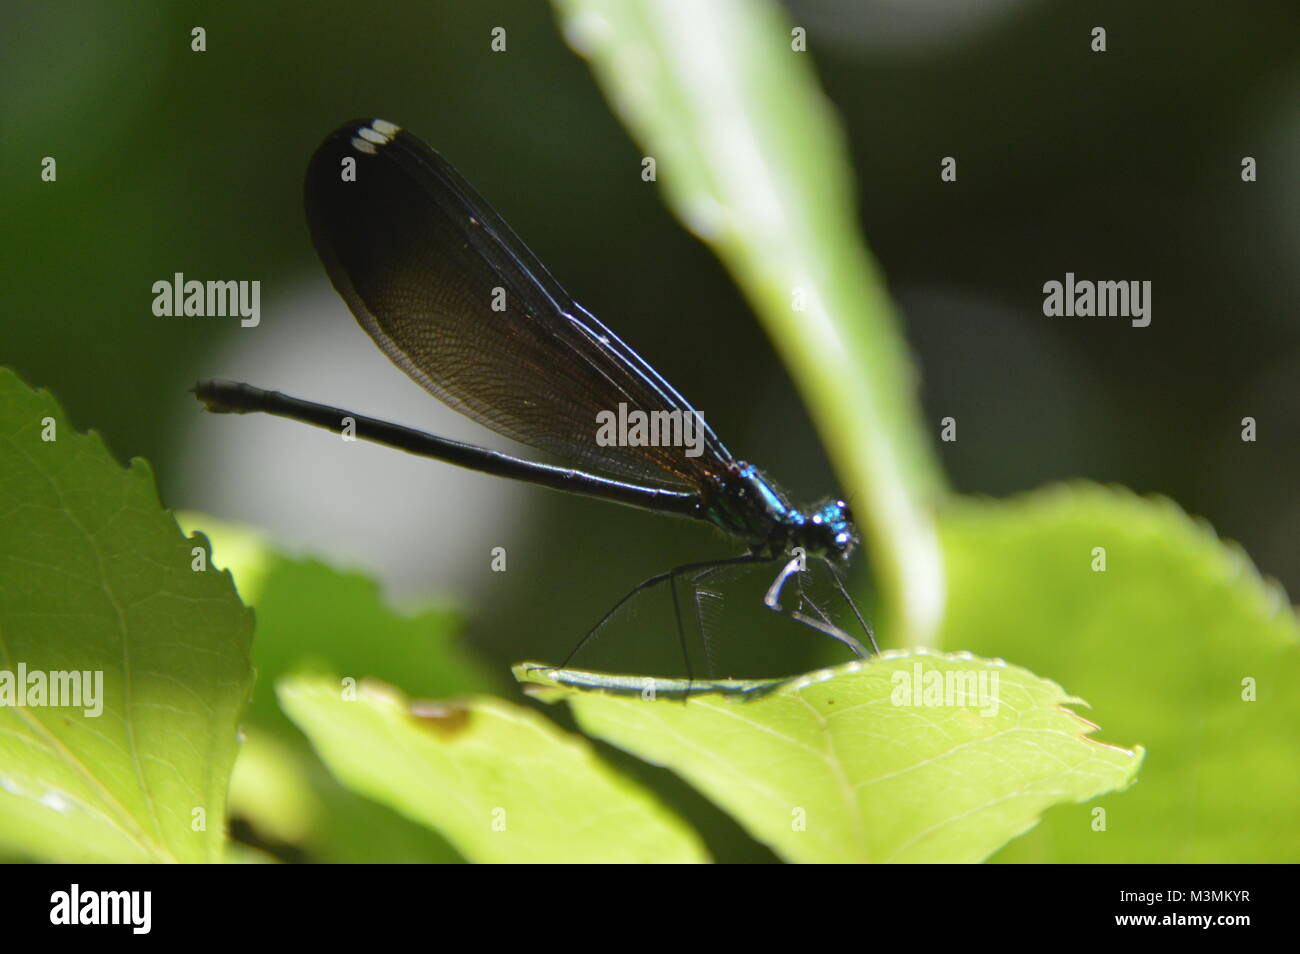 A dark blue mayfly sitting on a green leaf with green foliage (blurry) in the background of the picture. Taken at Great Falls, VA Stock Photo